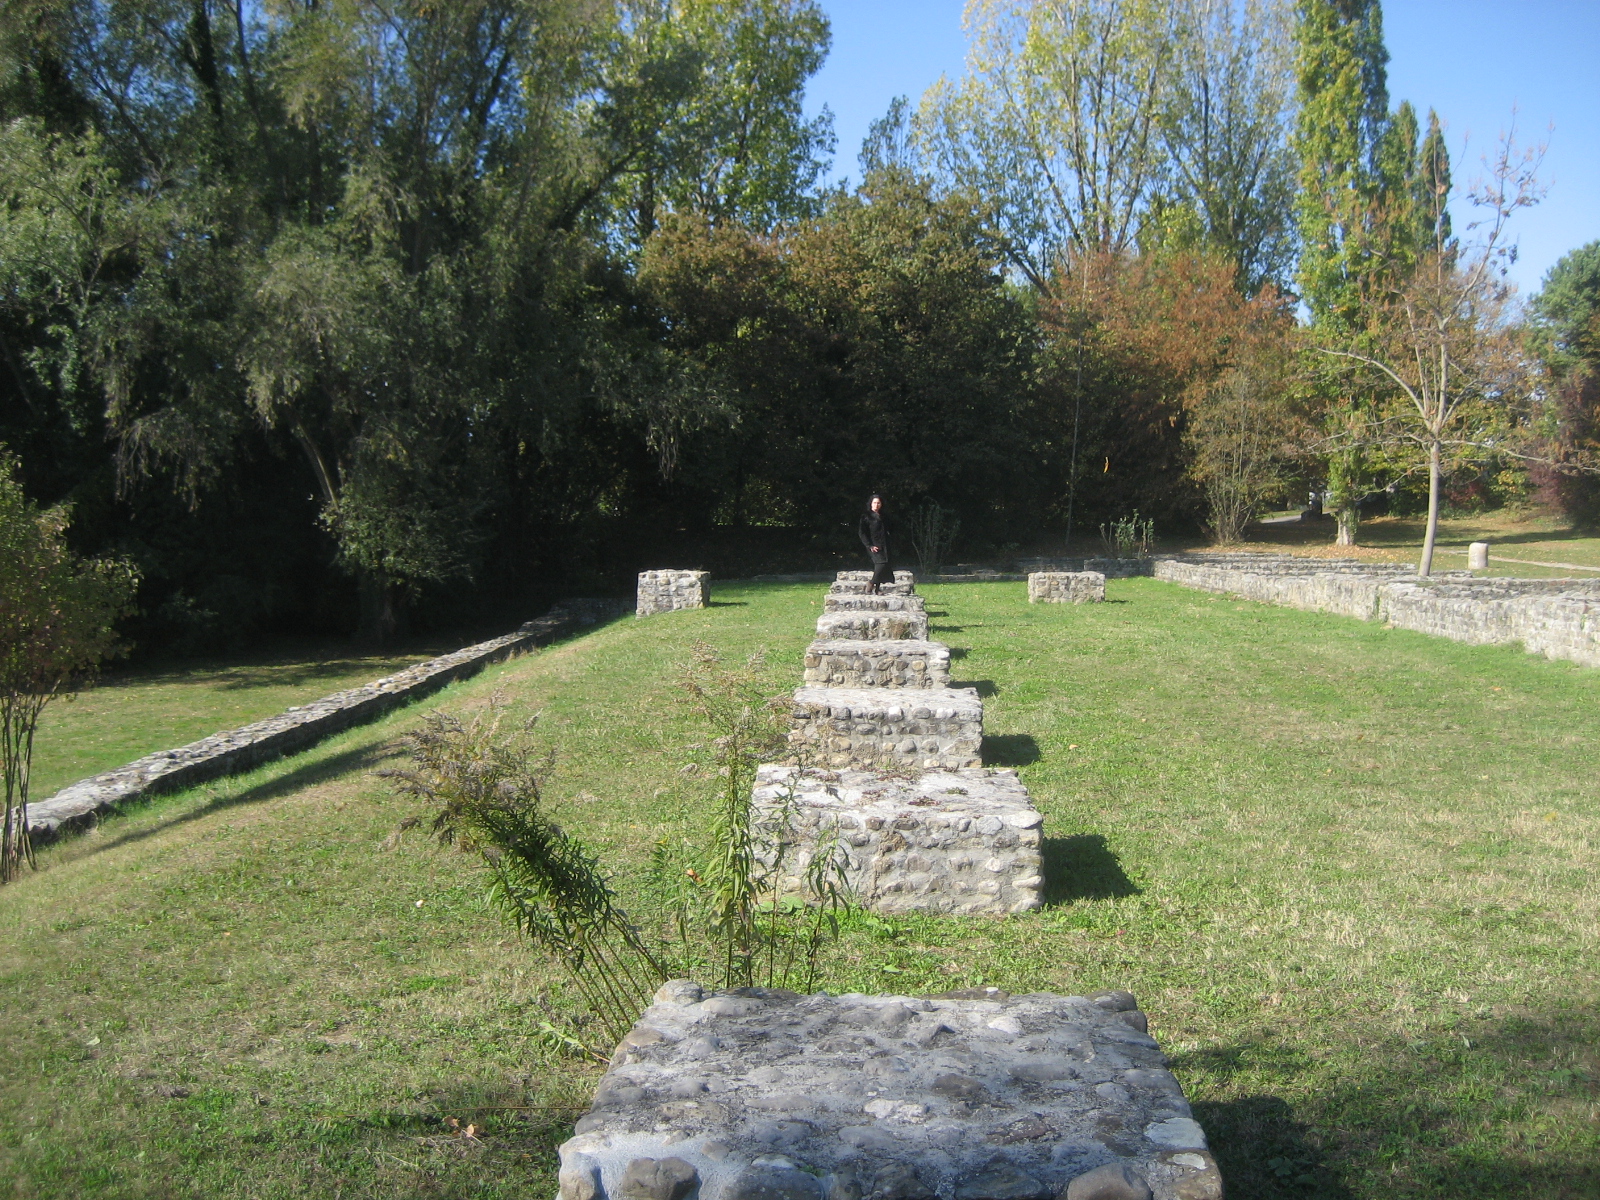 a long row of stone benches in a grassy area